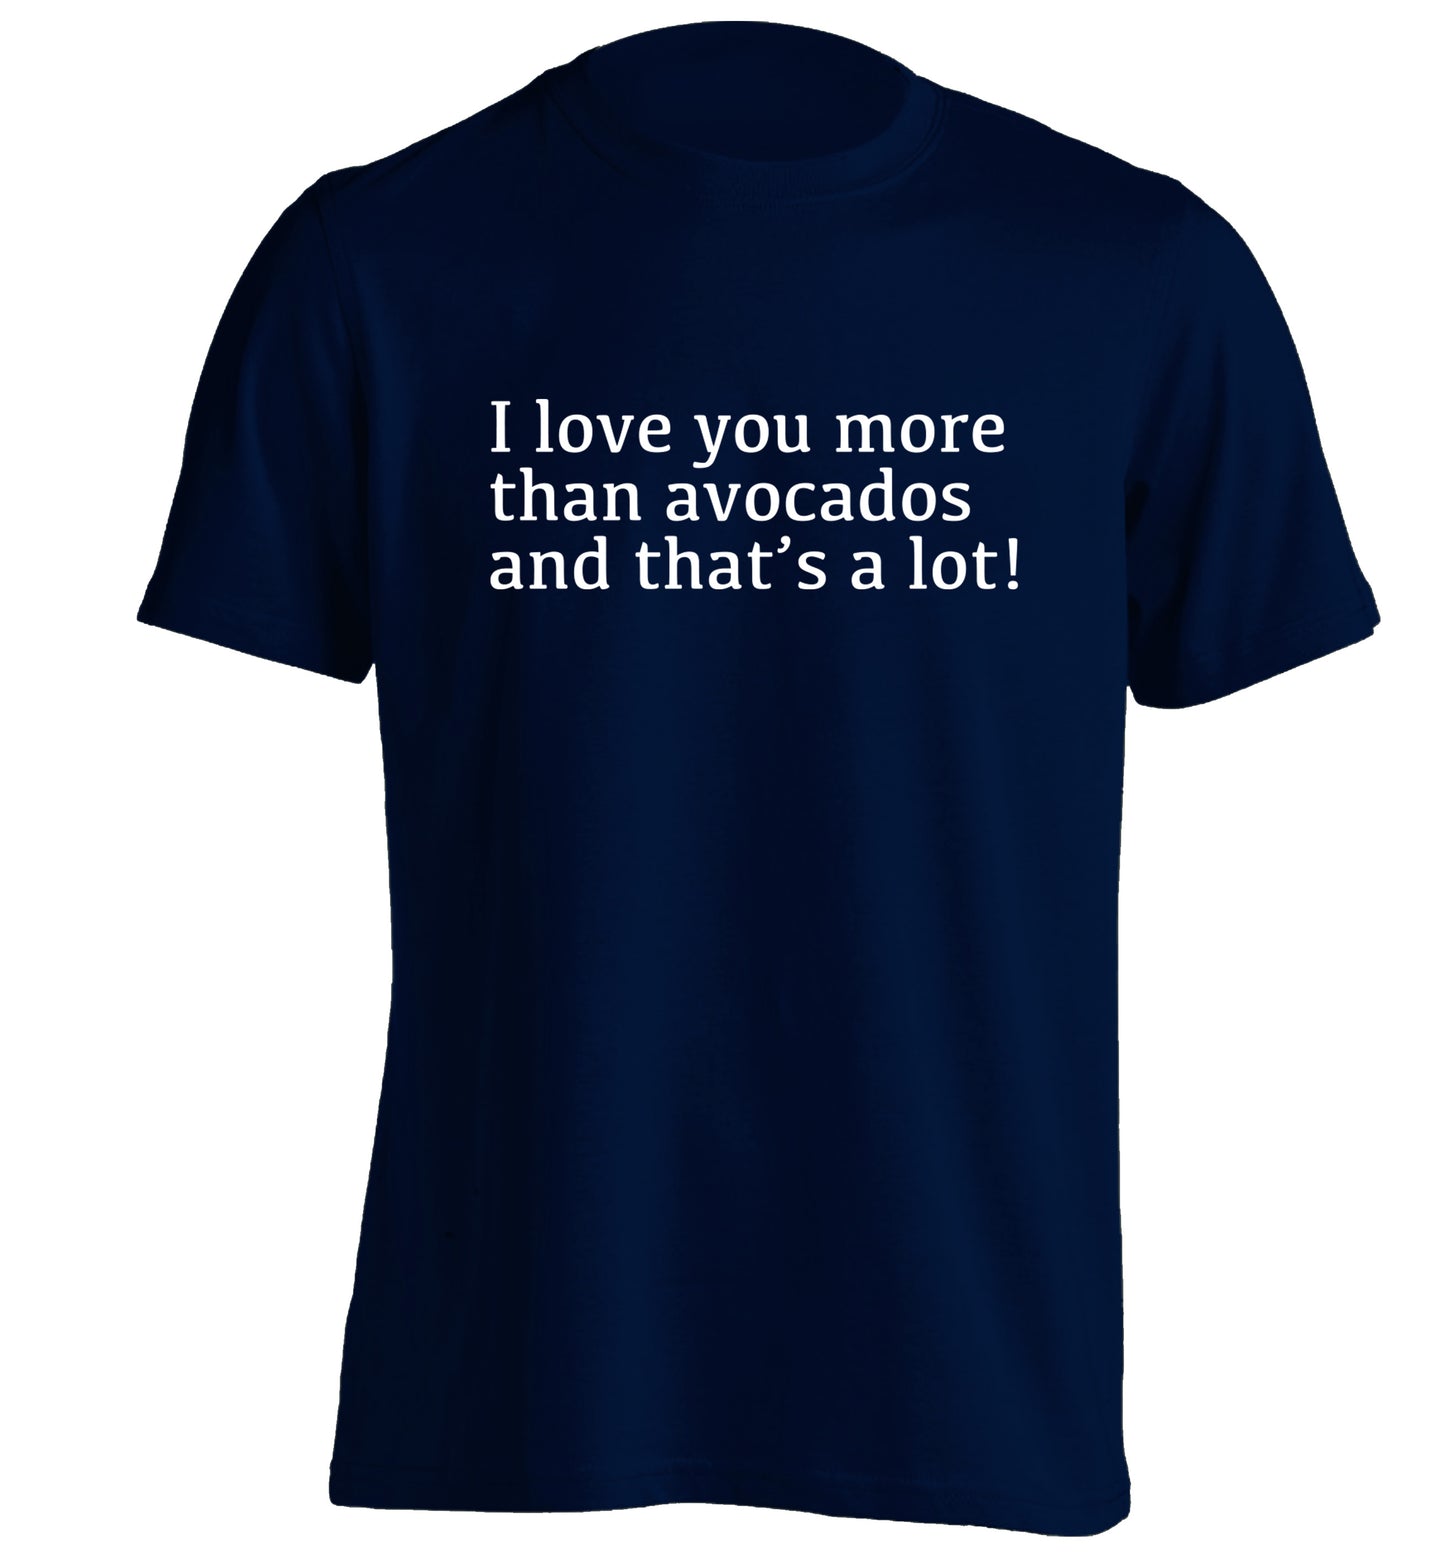 I love you more than avocados and that's a lot adults unisex navy Tshirt 2XL